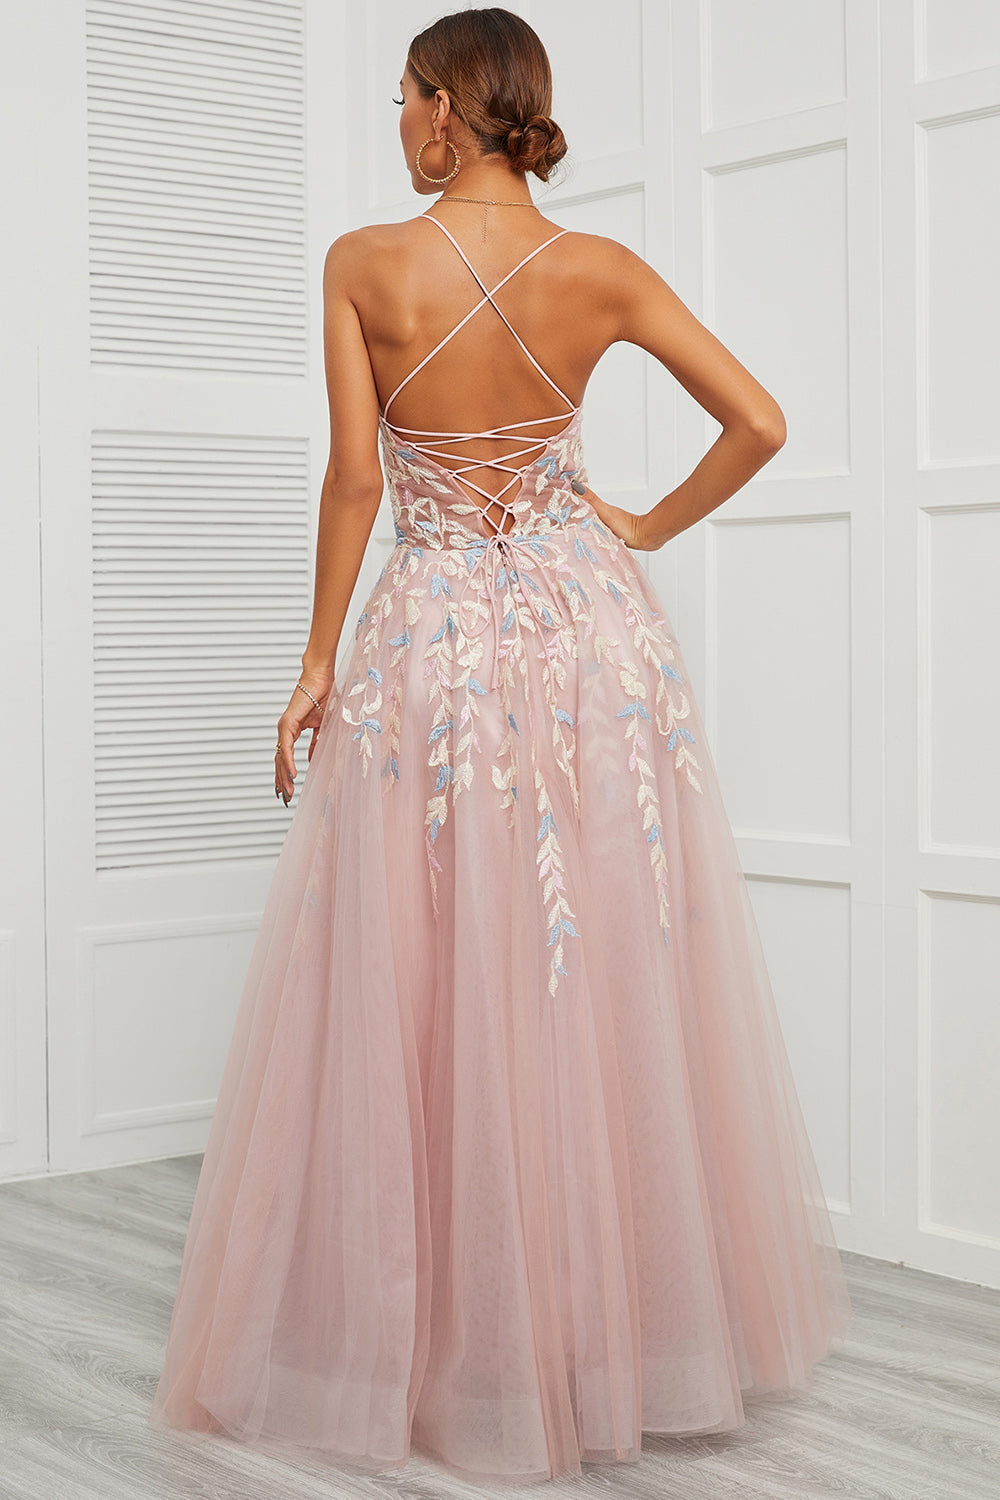 Spaghetti Straps Pink Tulle Prom Dress